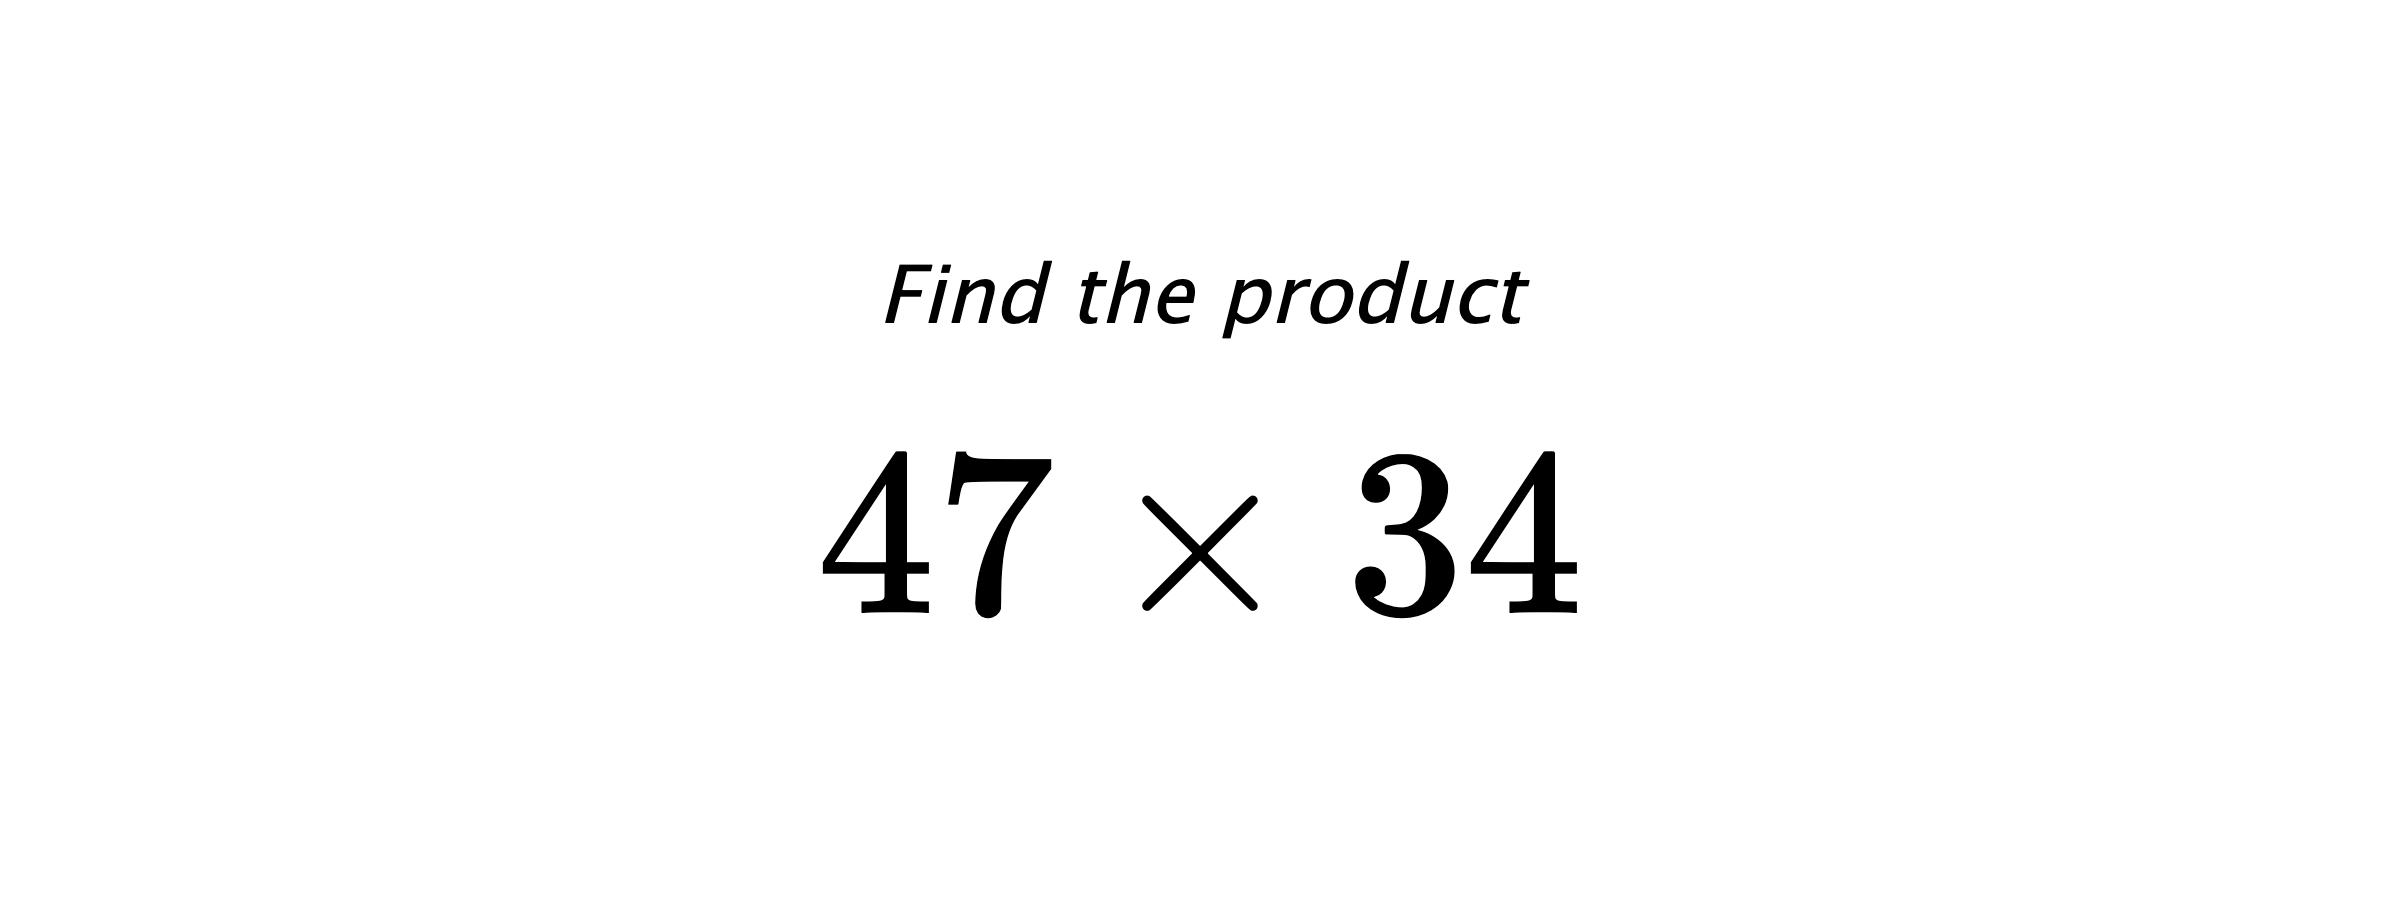 Find the product $ 47 \times 34 $